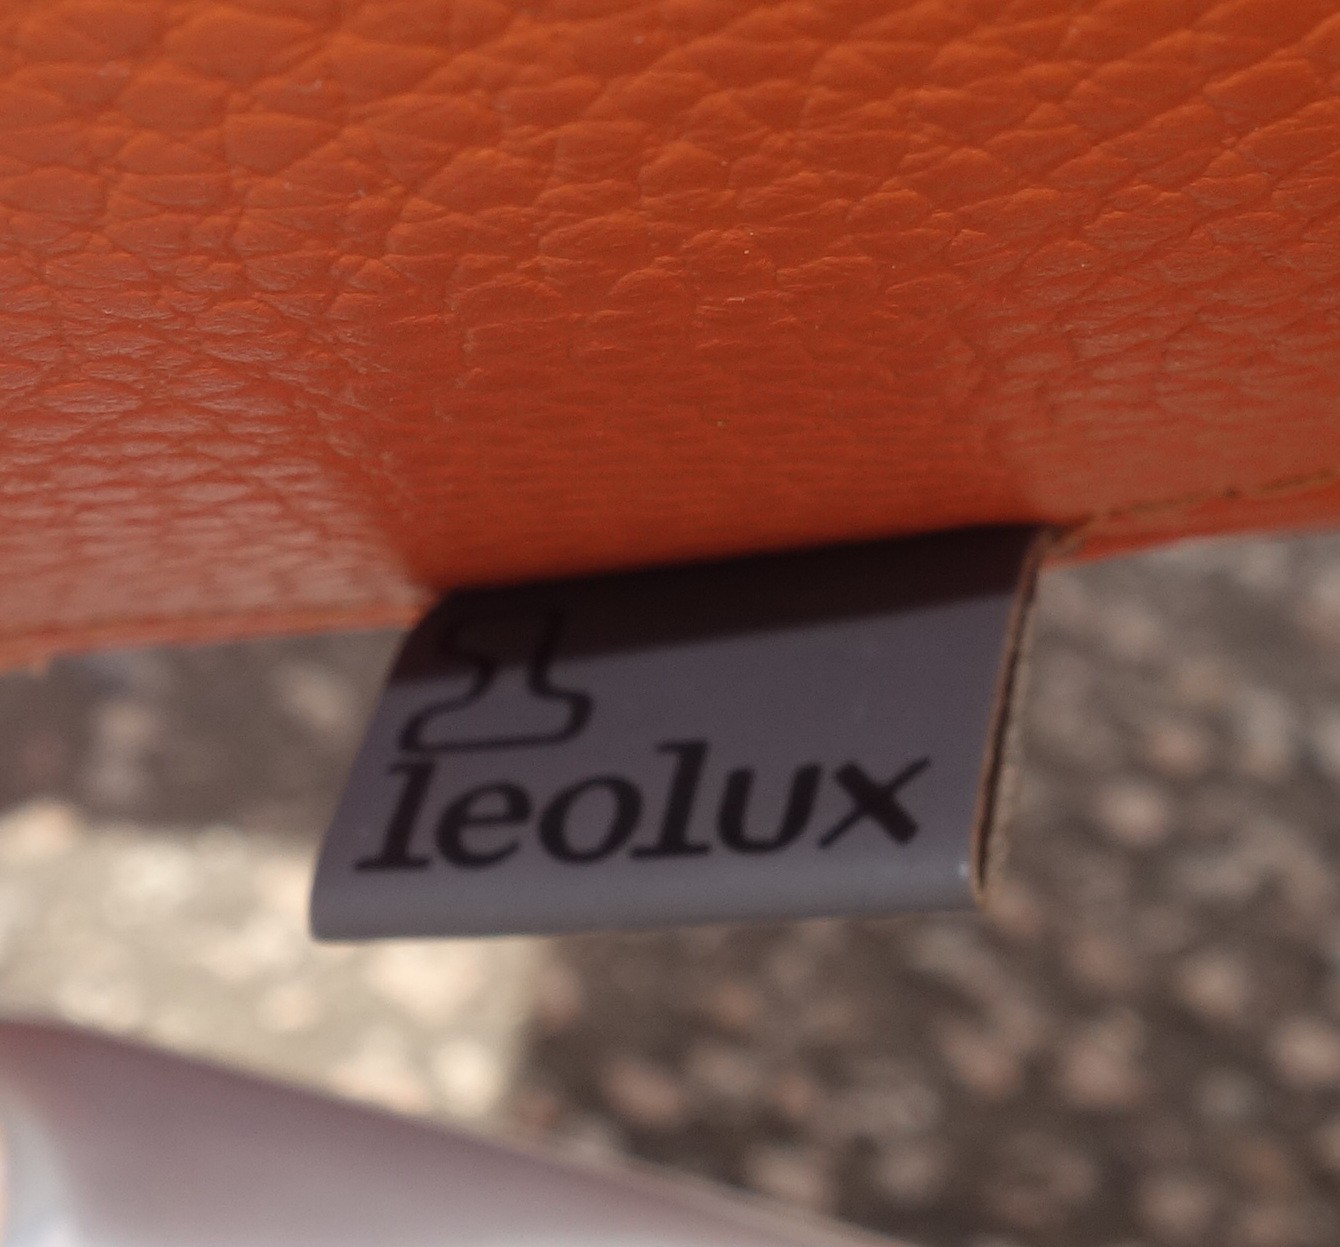 Leolux Caruzzo swivel armchair, designed by Hans Schrofer, launched 2015, custom made with orange - Image 6 of 6